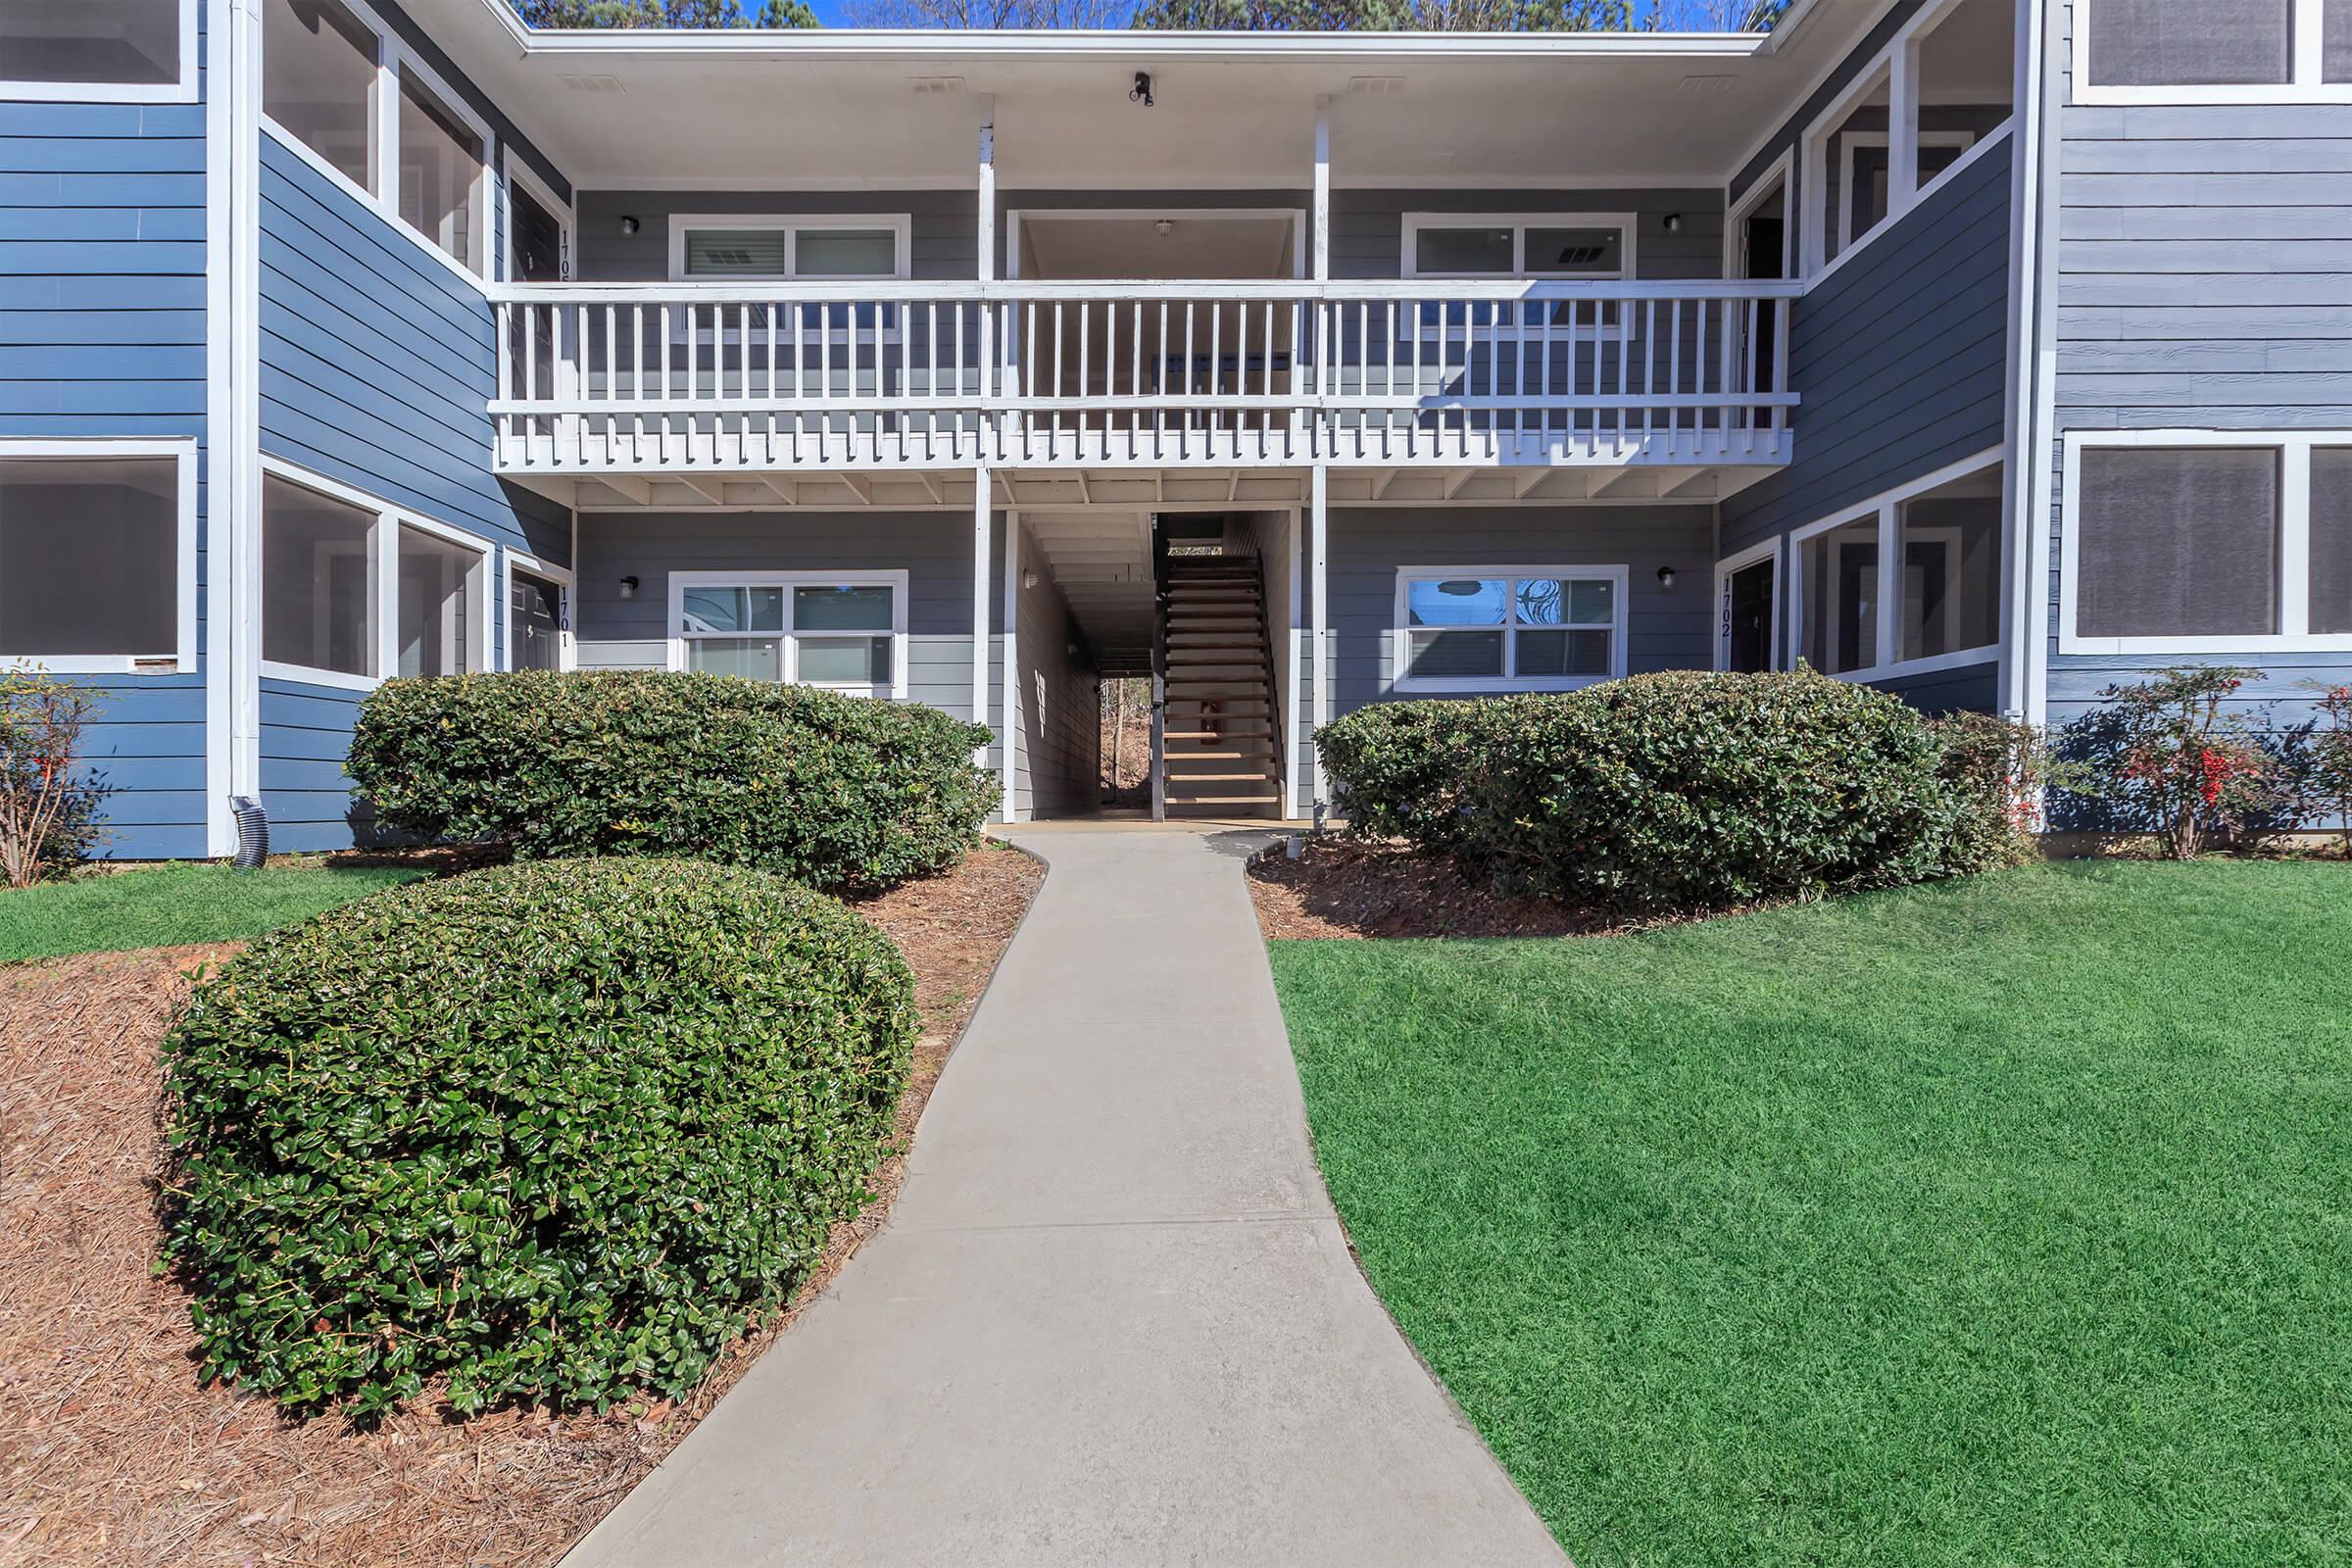 ONE AND TWO BEDROOM APARTMENTS FOR RENT IN COLLEGE PARK, GA